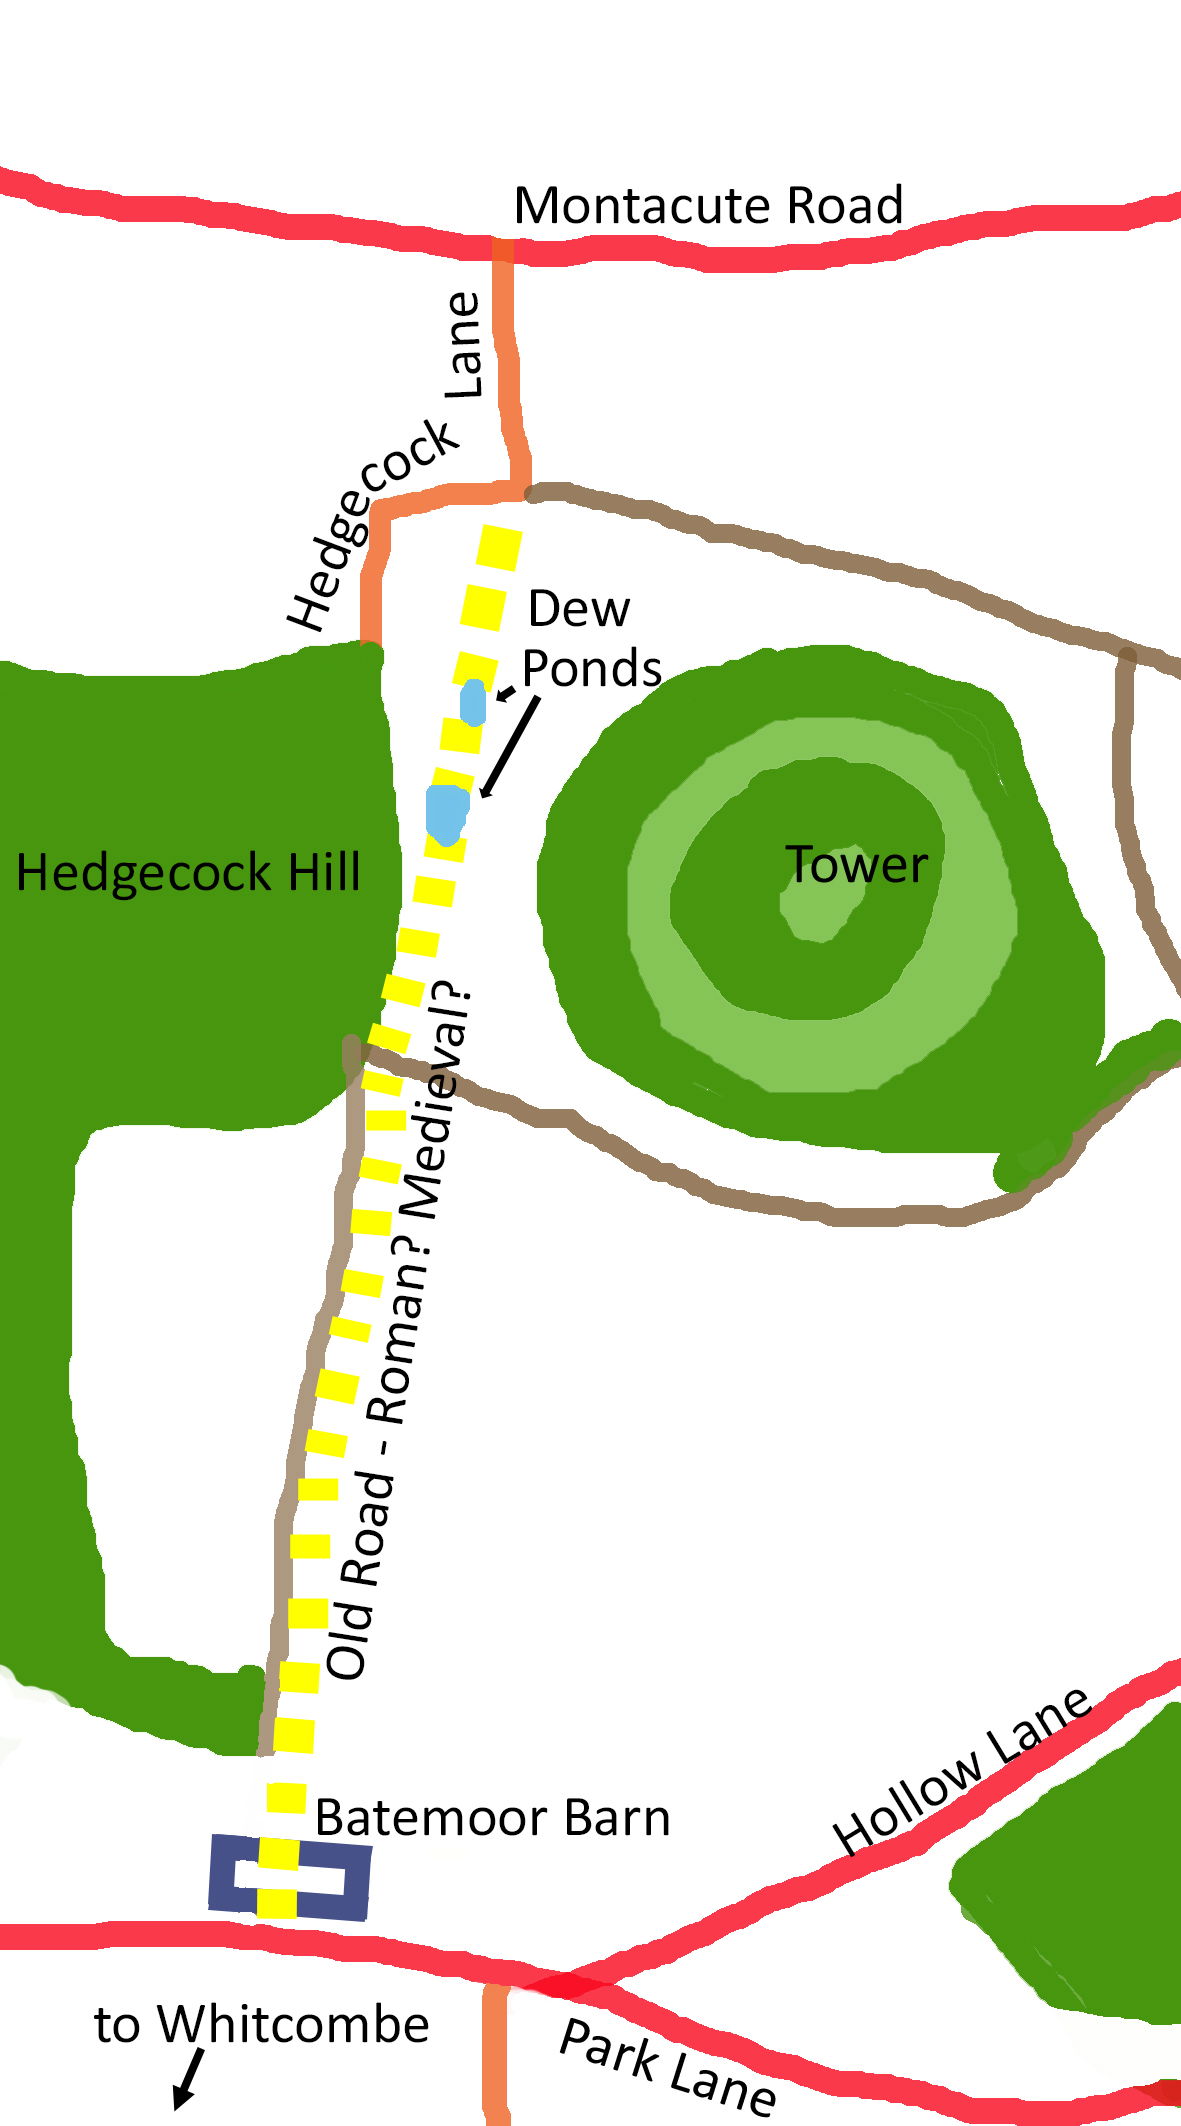 Diagram of route from Batemoor Barn to Hedgecock Lane , showing the dew ponds along the route at a point between the northern portions of Hedgecock Hill and St Michael's Hill